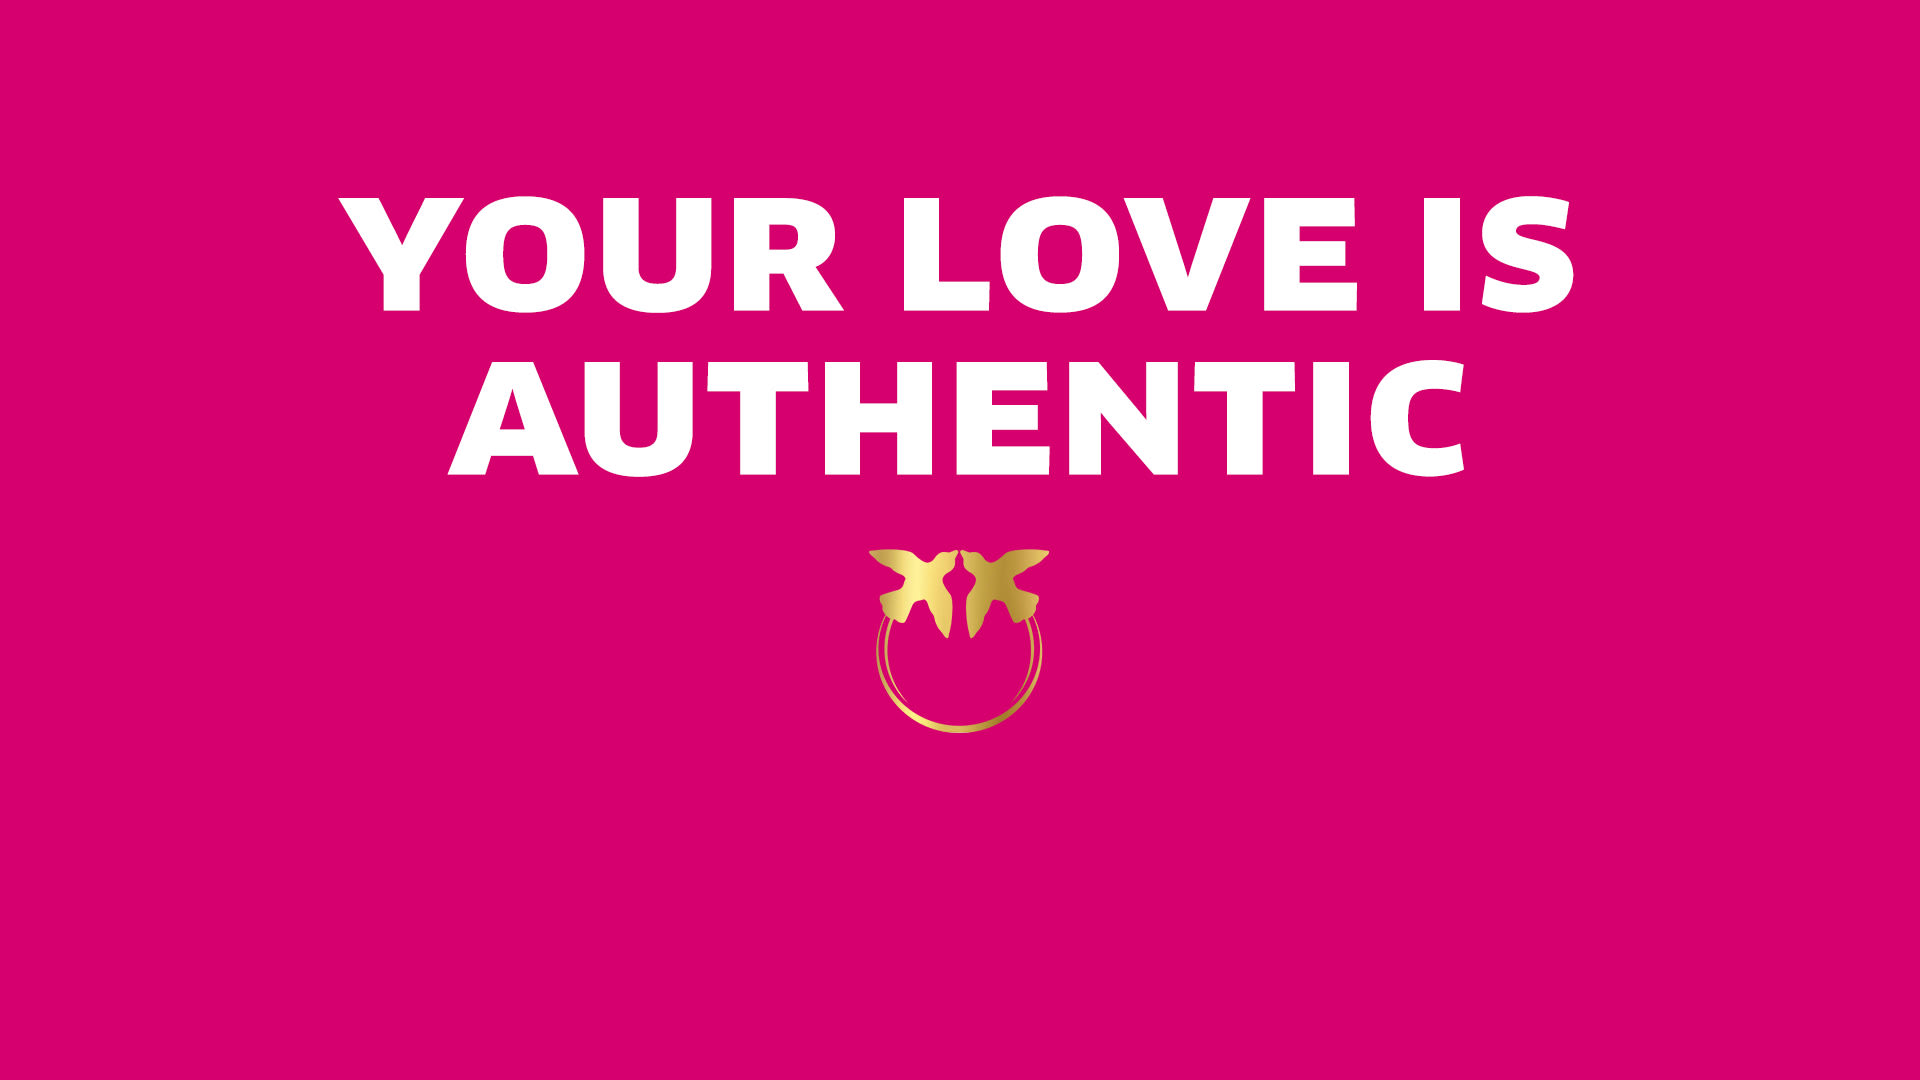 YOUR LOVE IS AUTHENTIC